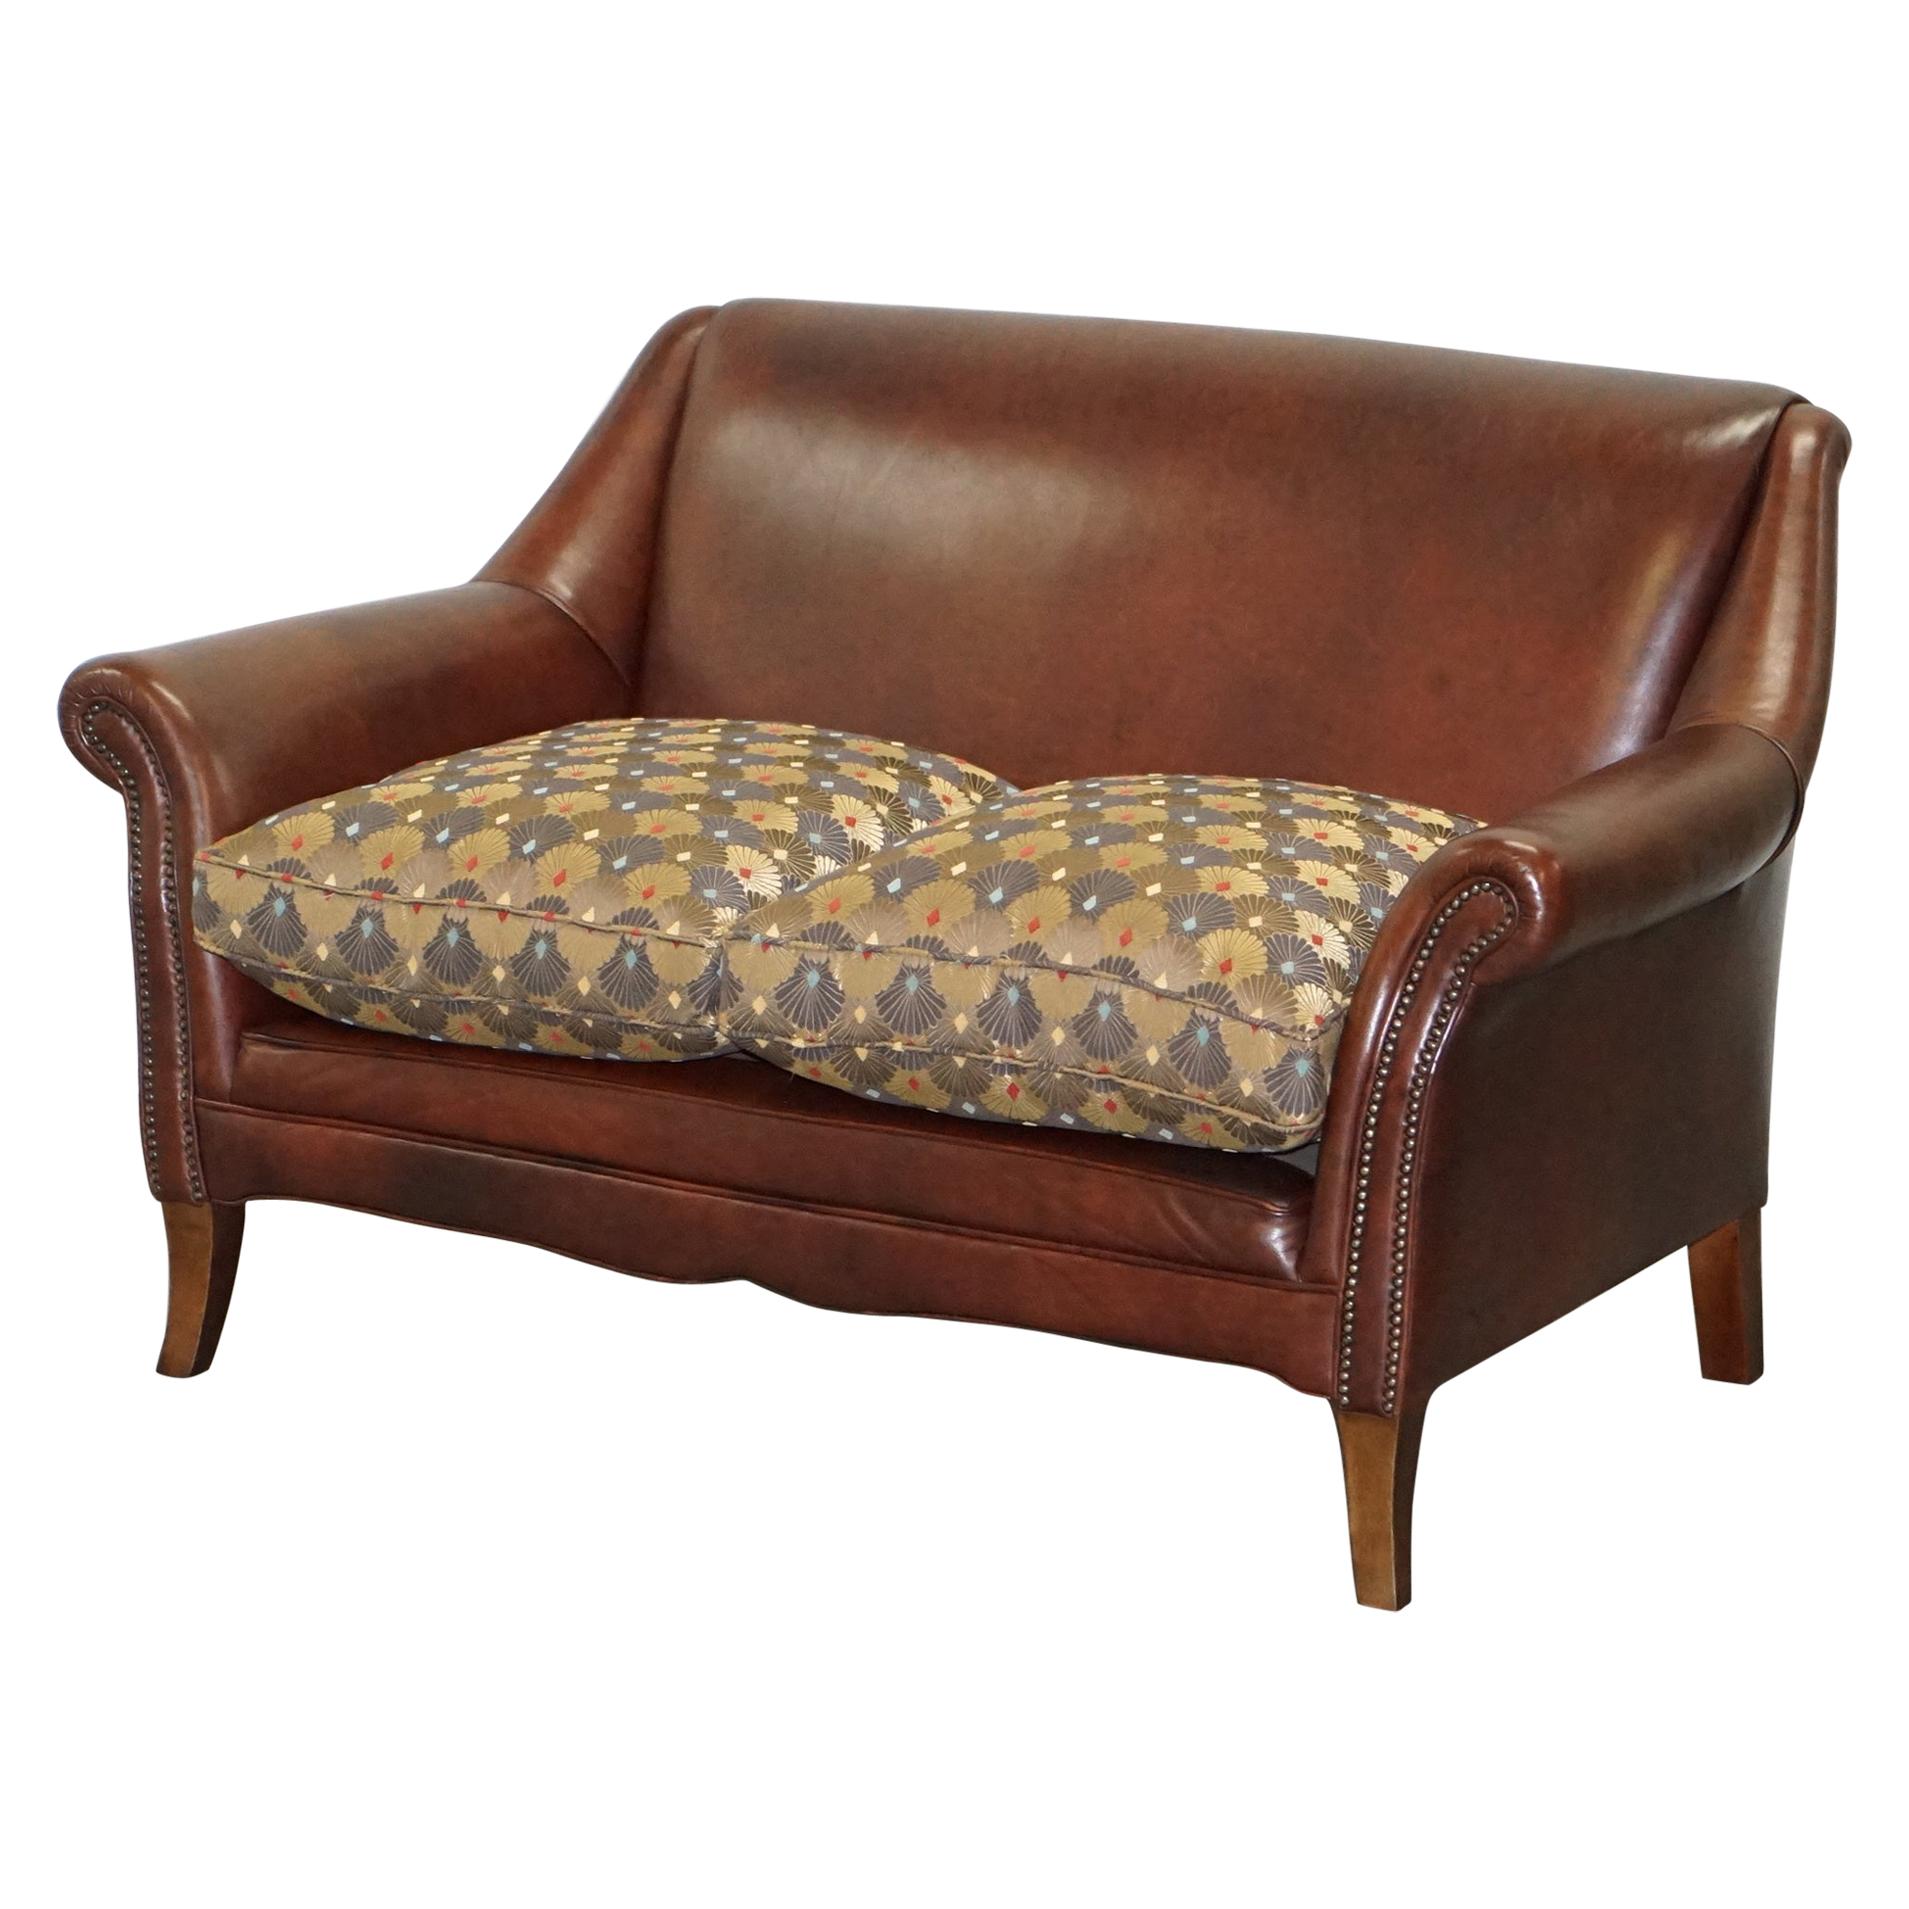 Vintage Aged Brown Leather Sofa with Liberty's of London Upholstered Cushions